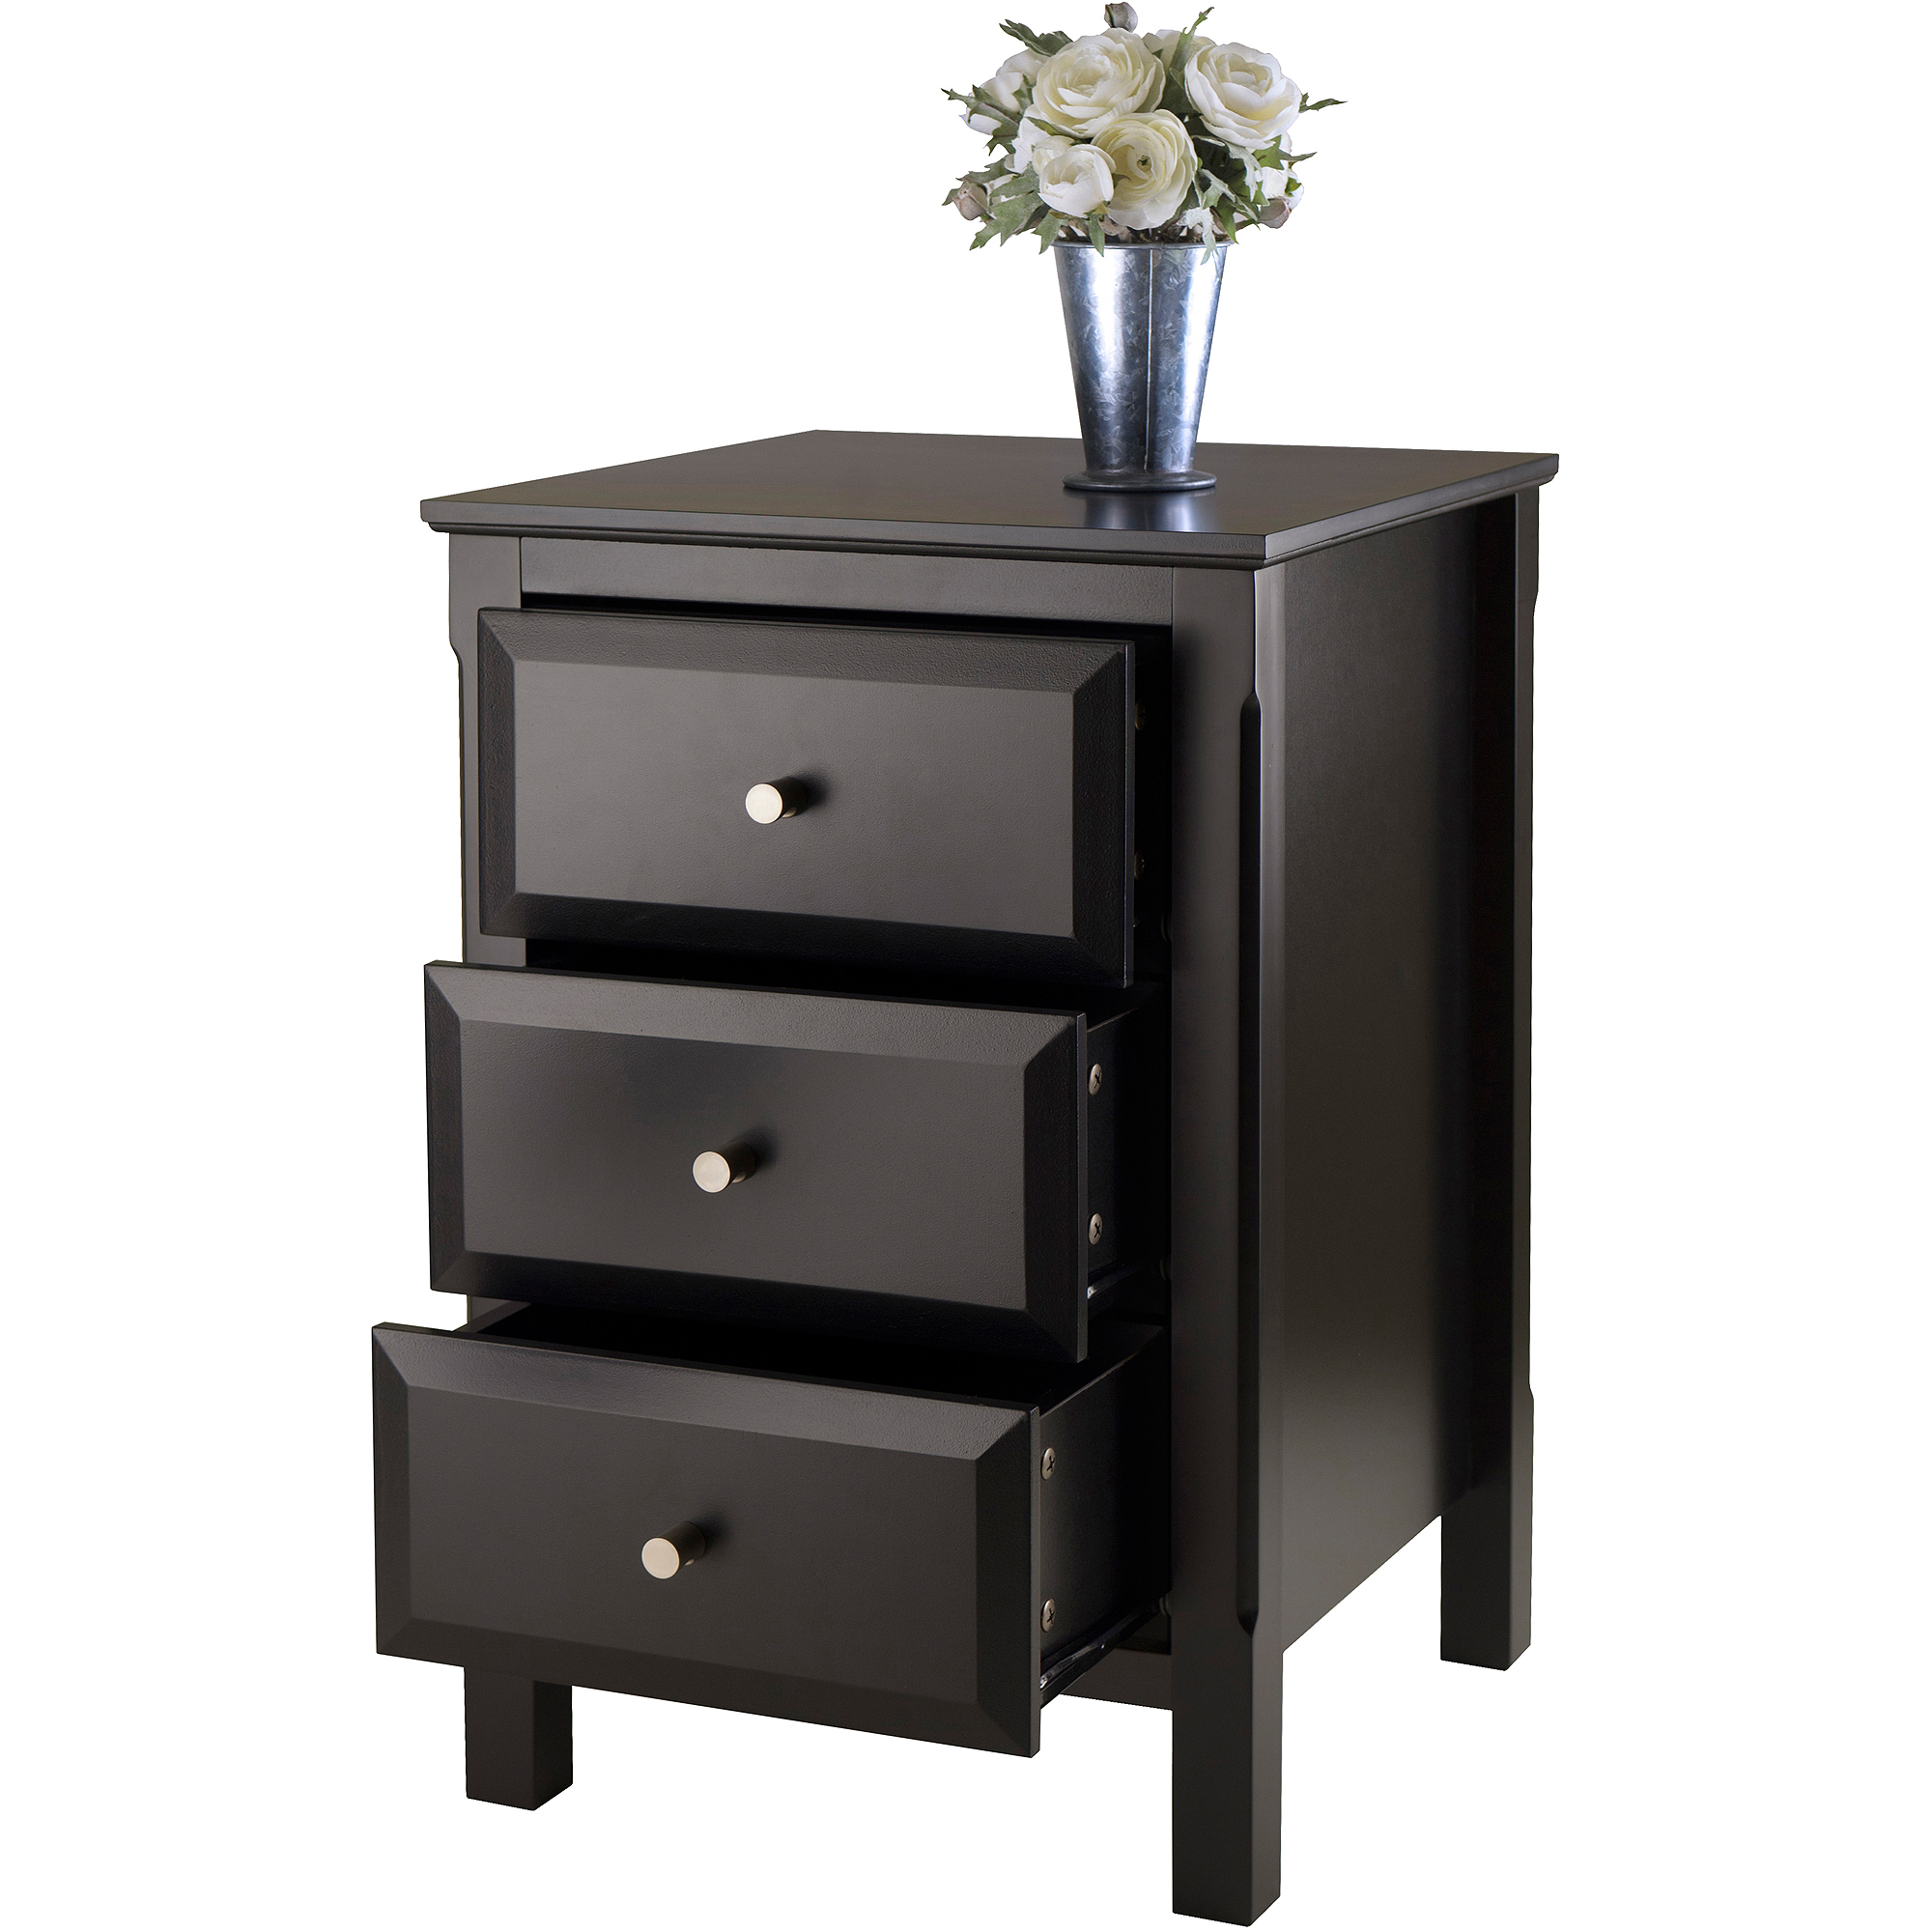 Winsome Timmy Nightstand, Black Finish - image 3 of 4